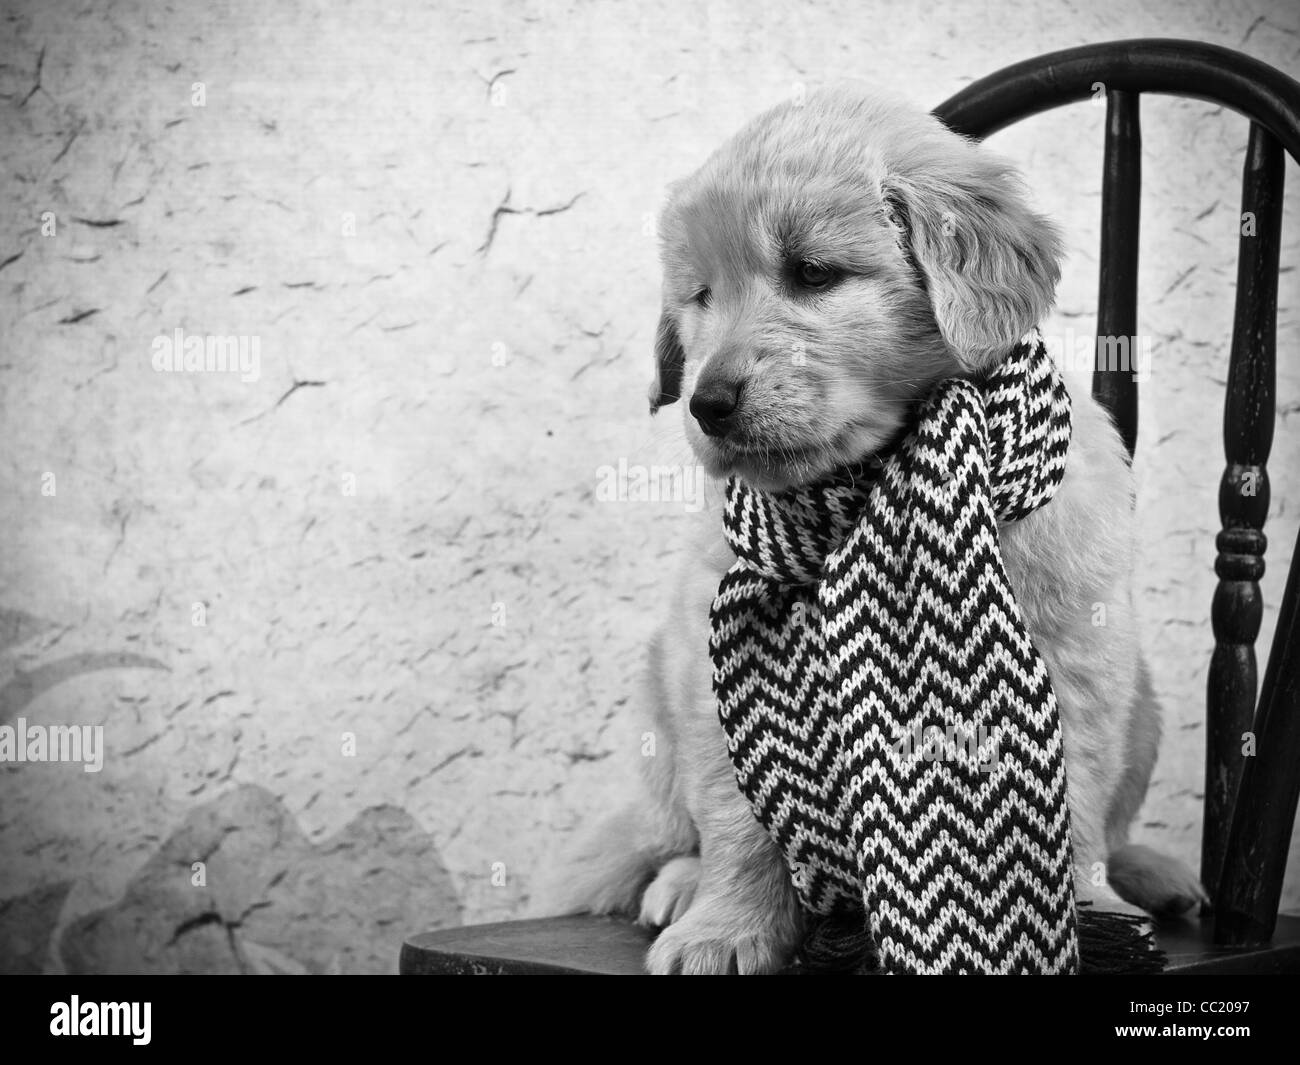 Black and white photo of a cute Golden Retriever puppy sitting on a chair wearing a scarf. Stock Photo